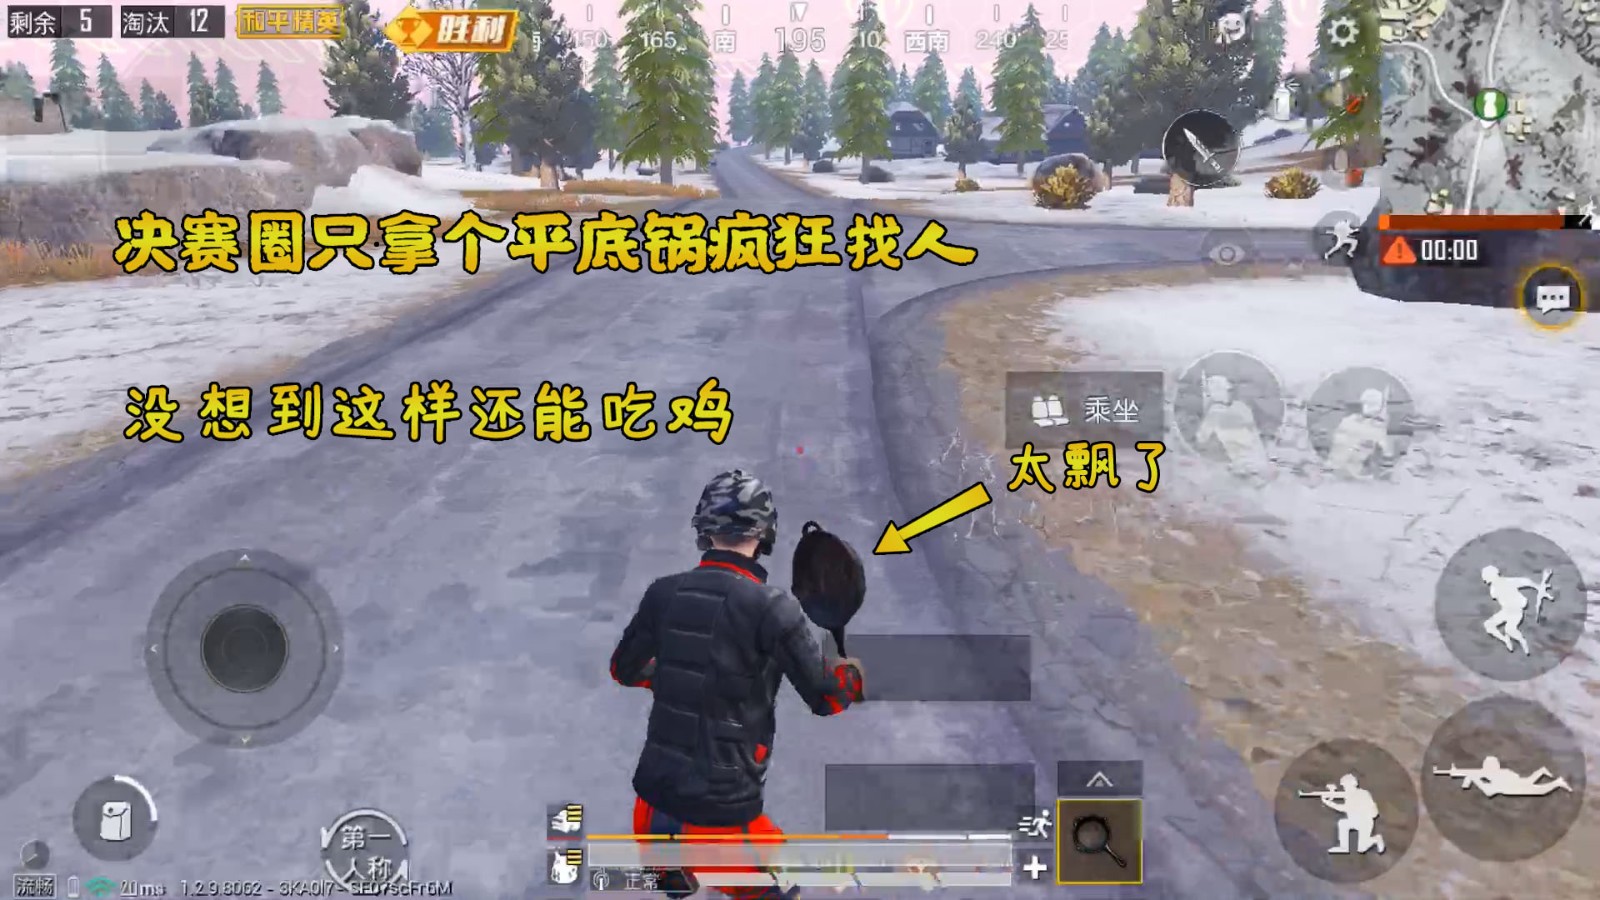 Lanyi Peace Elite: Air raid shelter jumped more than a dozen people to win, the final circle with a pan to find people, too floating